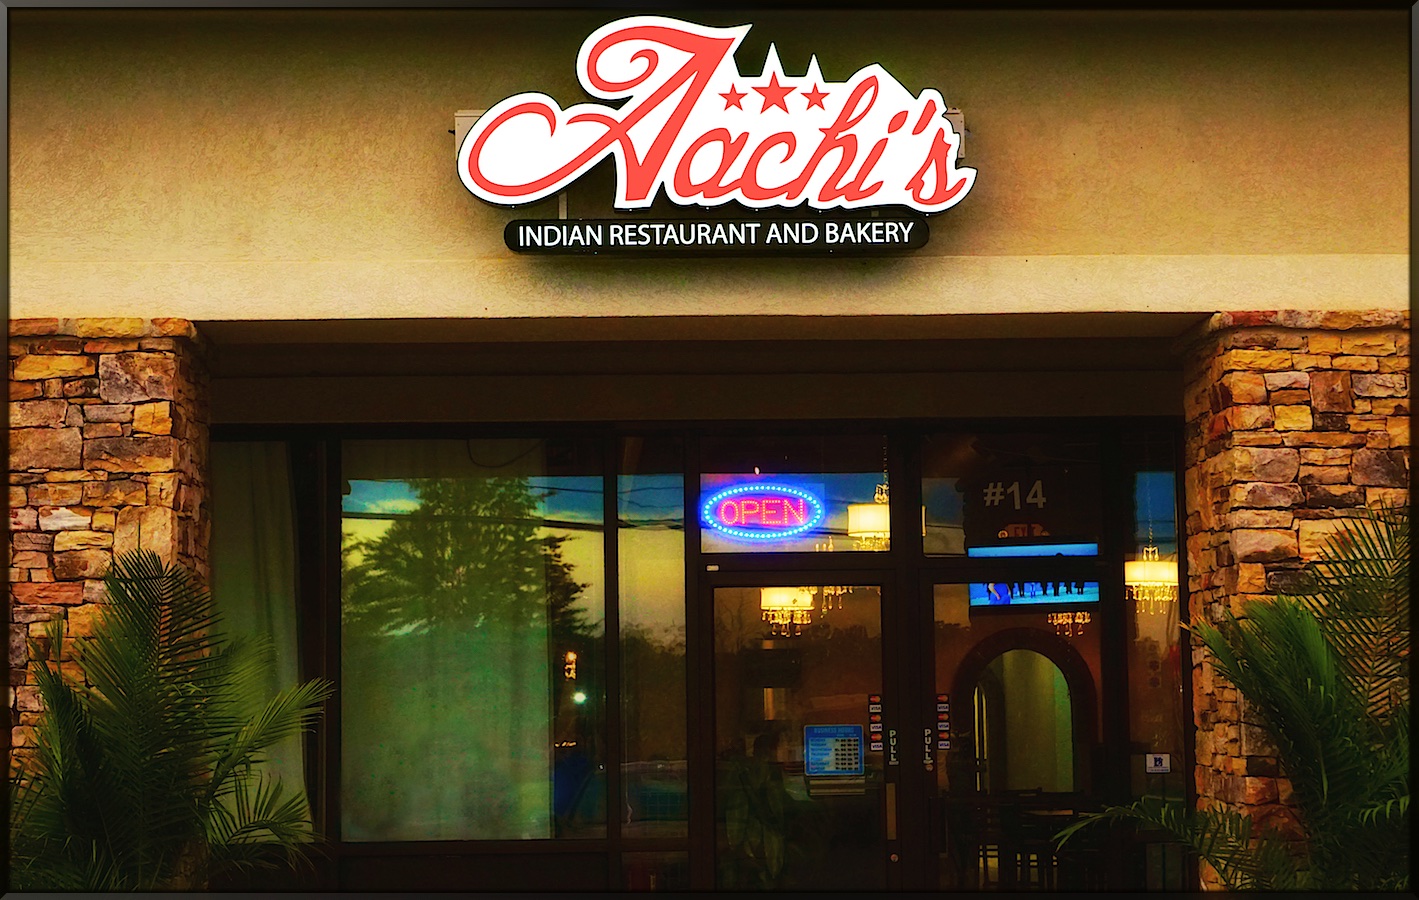 Aachi's Indian Restaurant and Bakery